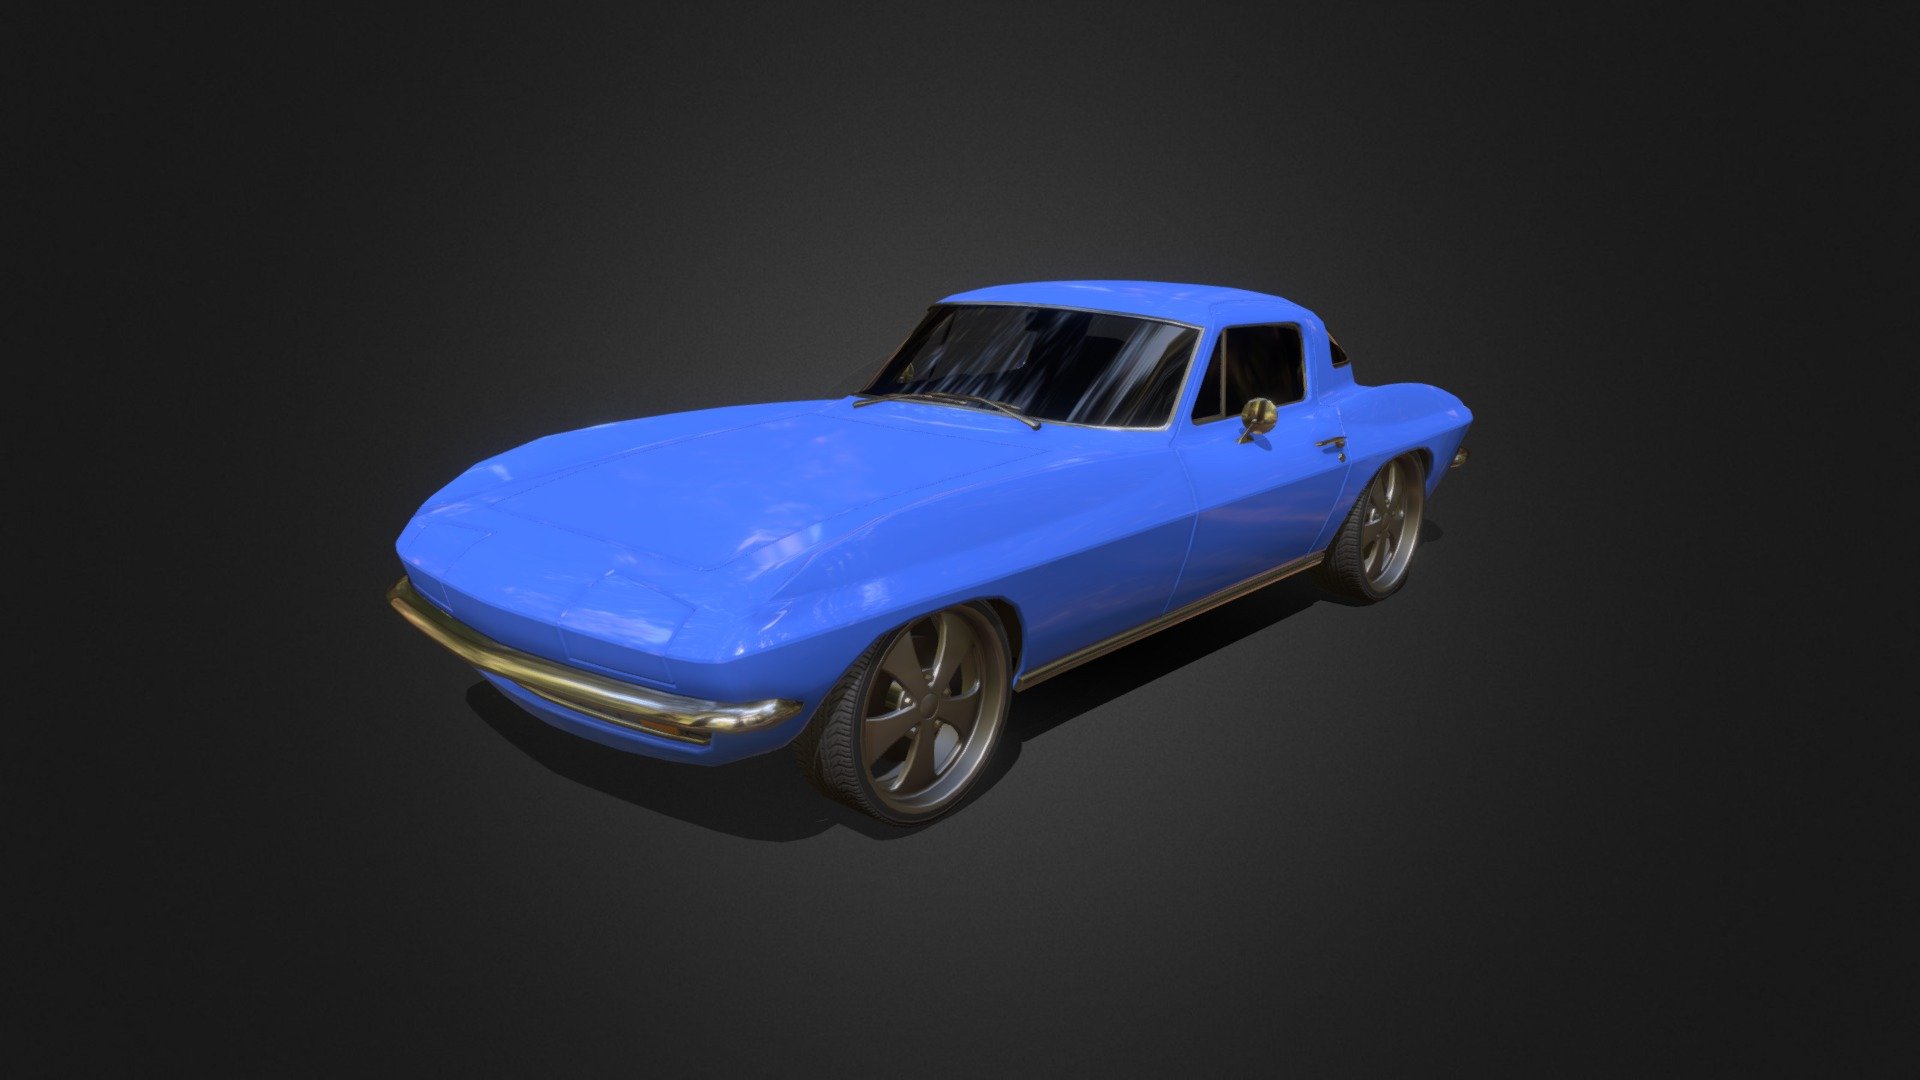 Game-ready vehicle model with Textures, 4 LOD states, and simplified collision meshes.

Vehicle model is based on 1960s car designs with modern wheels 3d model